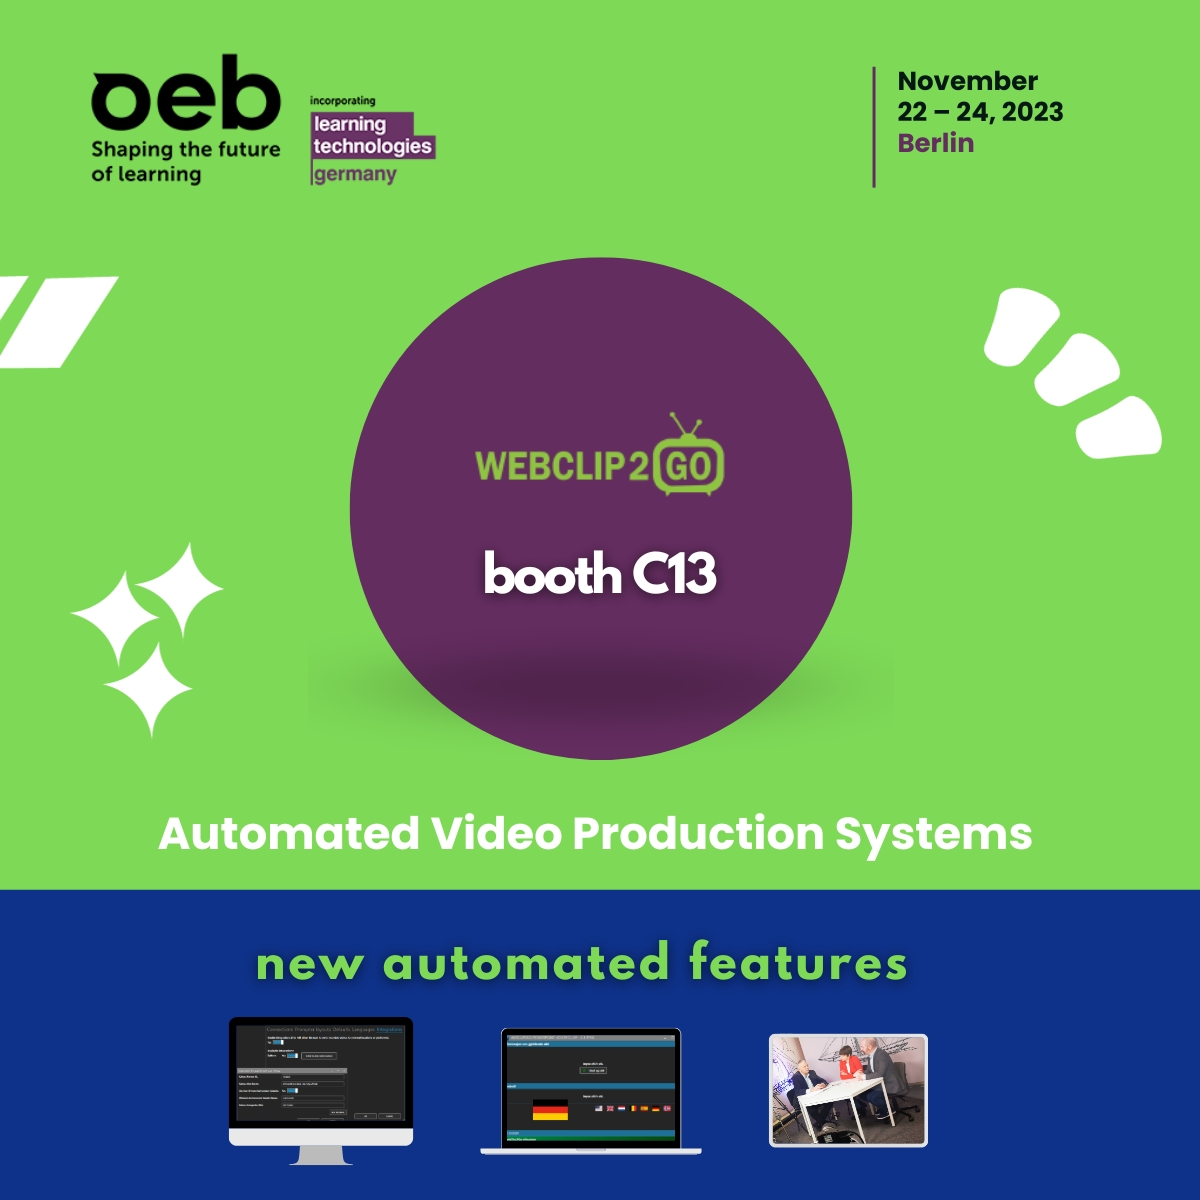 WebClip2Go to Launch ‘hardware-lite’ Video Production System at OEB 2023